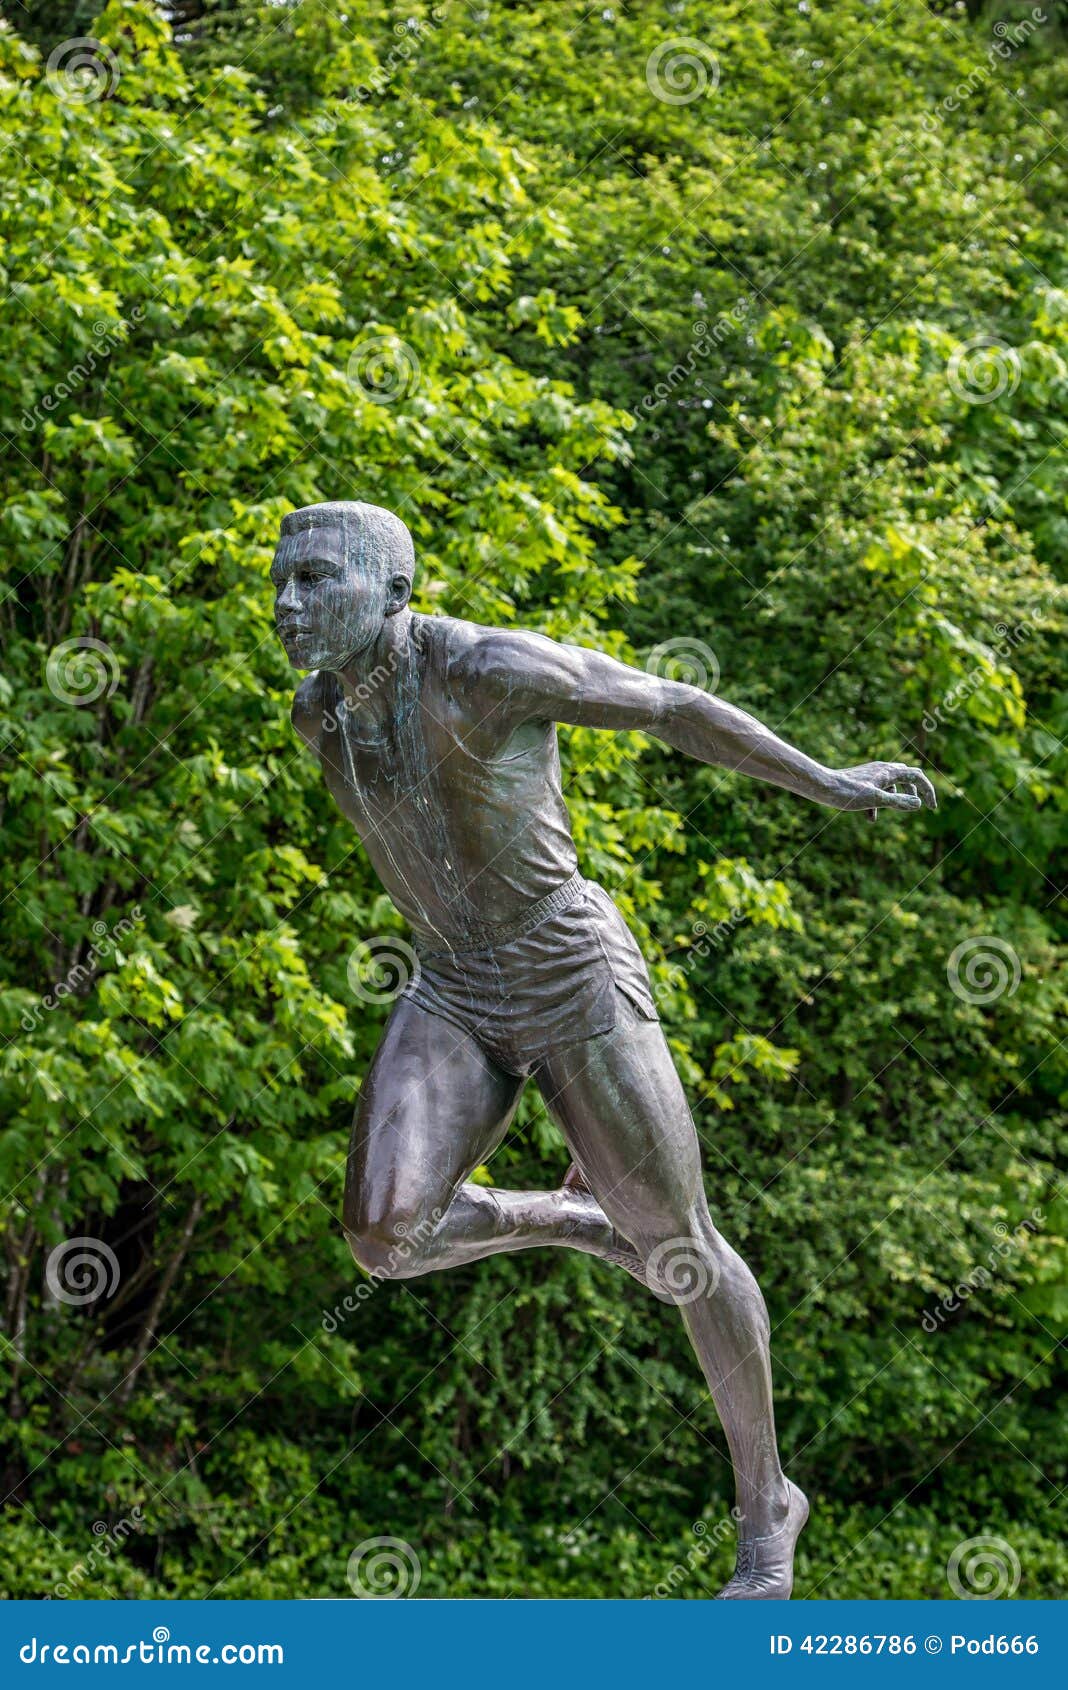 stanley park vancouver canada harry jerome statue